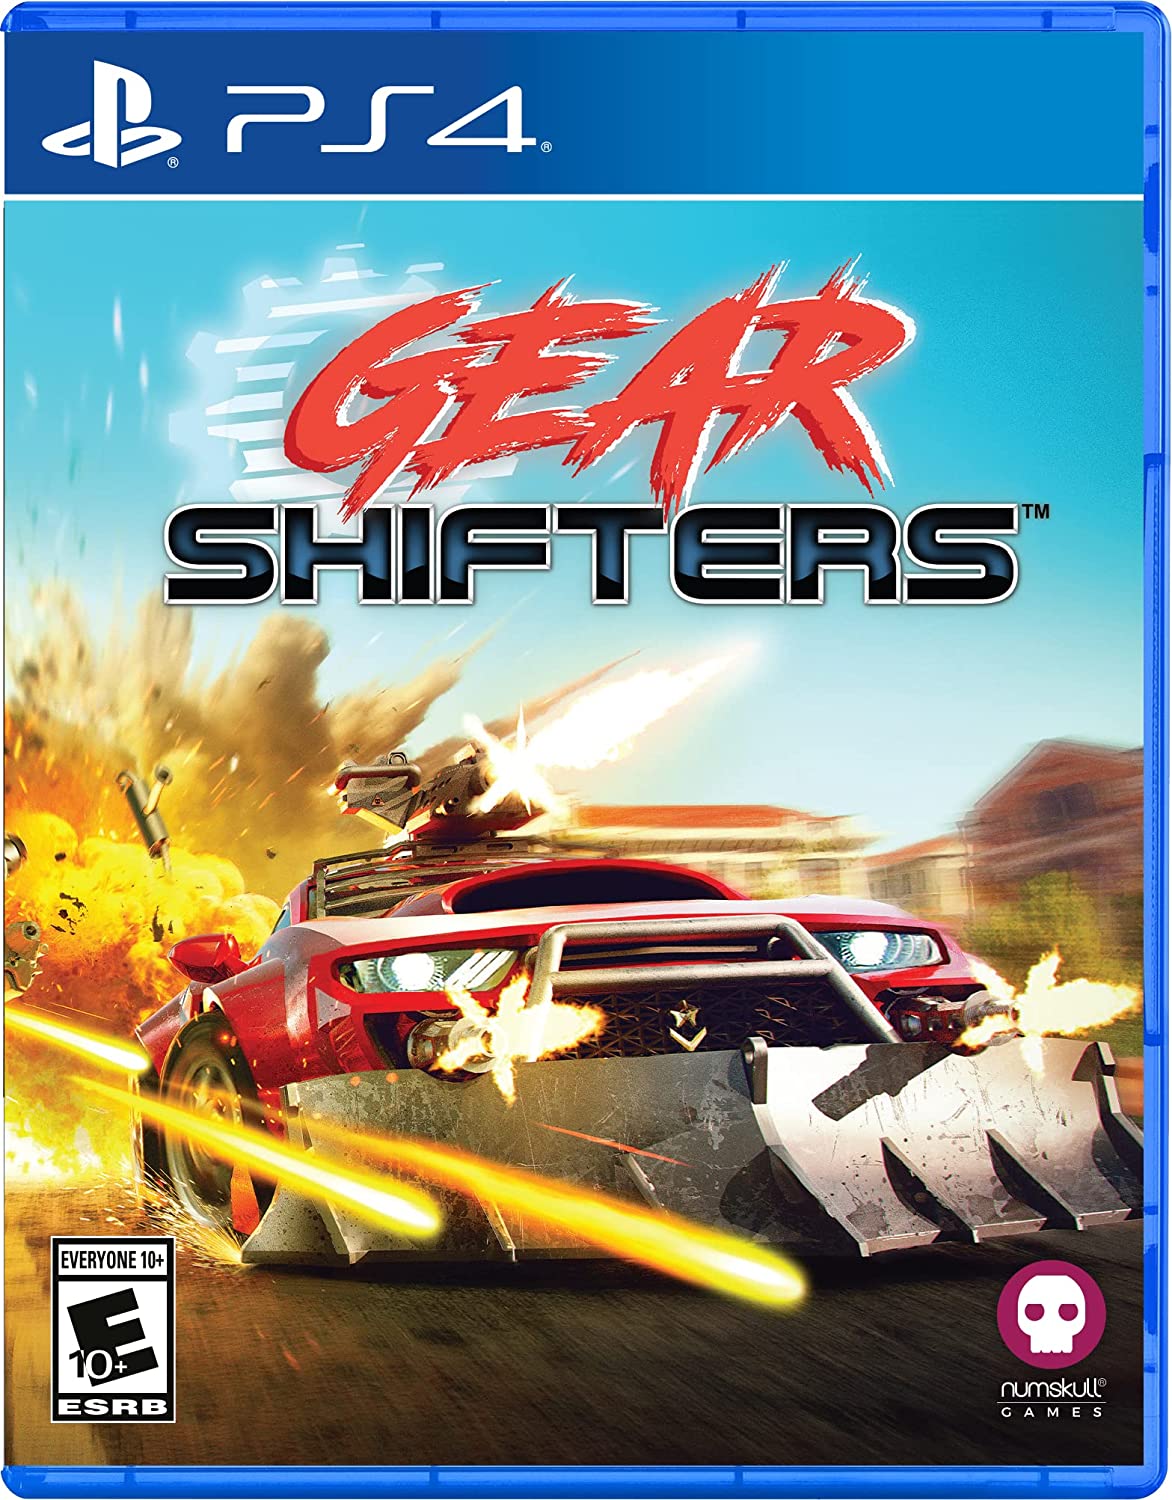 [PS4] Gearshifters